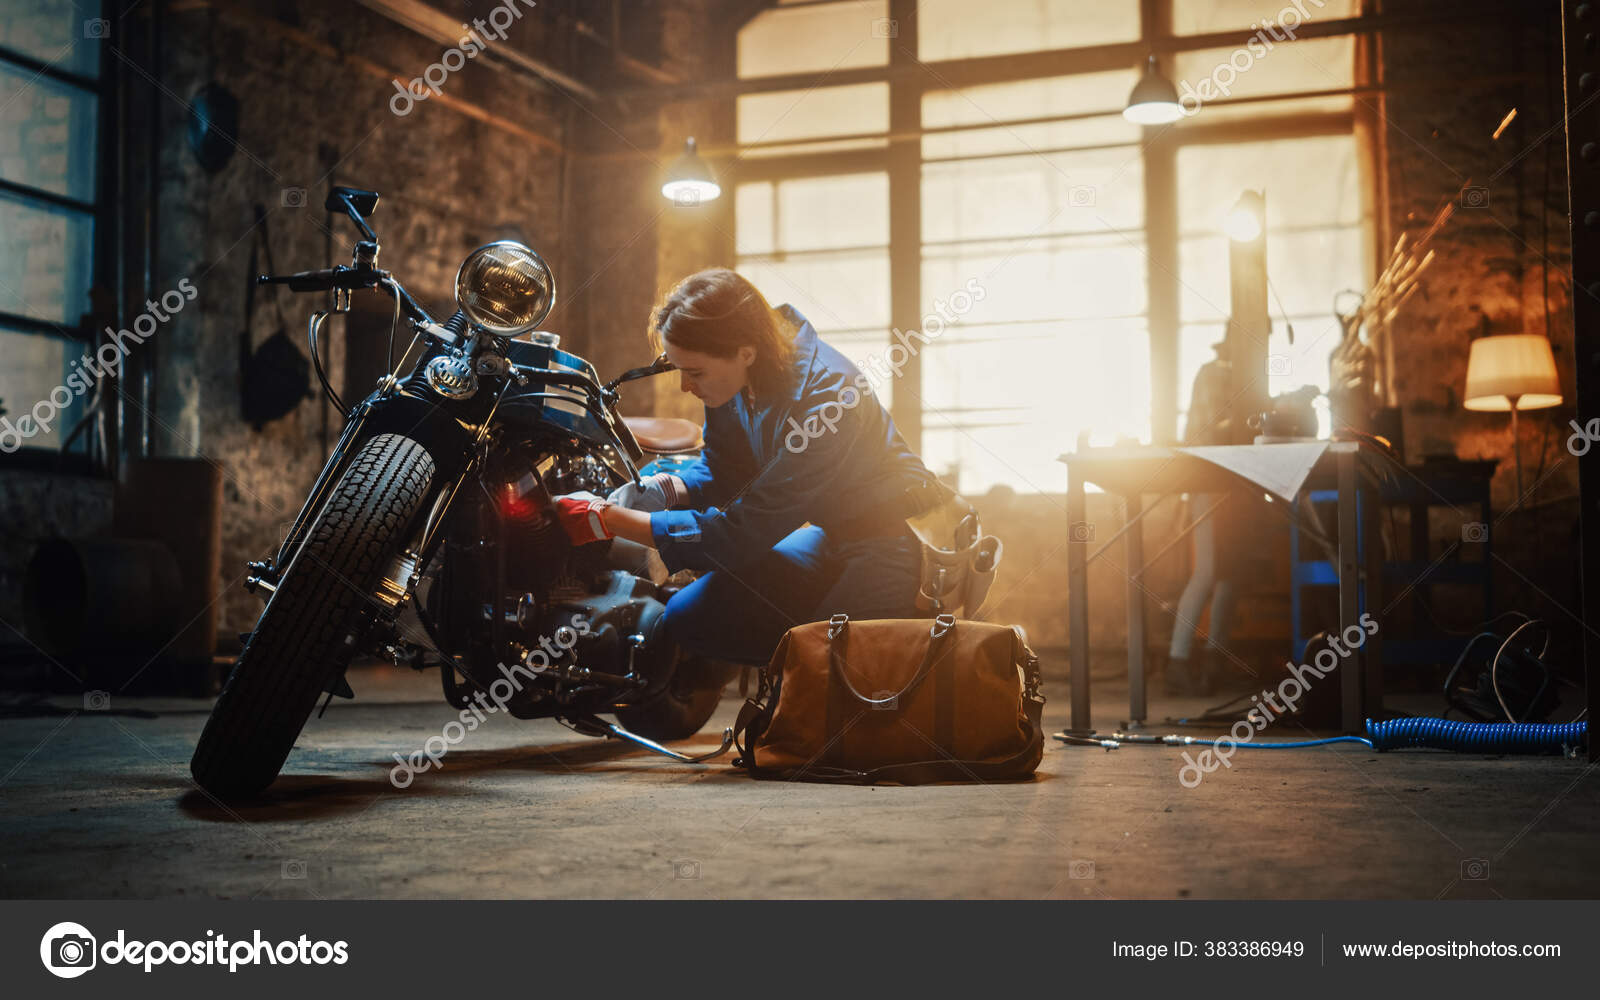 Young Beautiful Female Mechanic is Working on a Custom Bobber Motorcycle.  Talented Girl Wearing a Blue